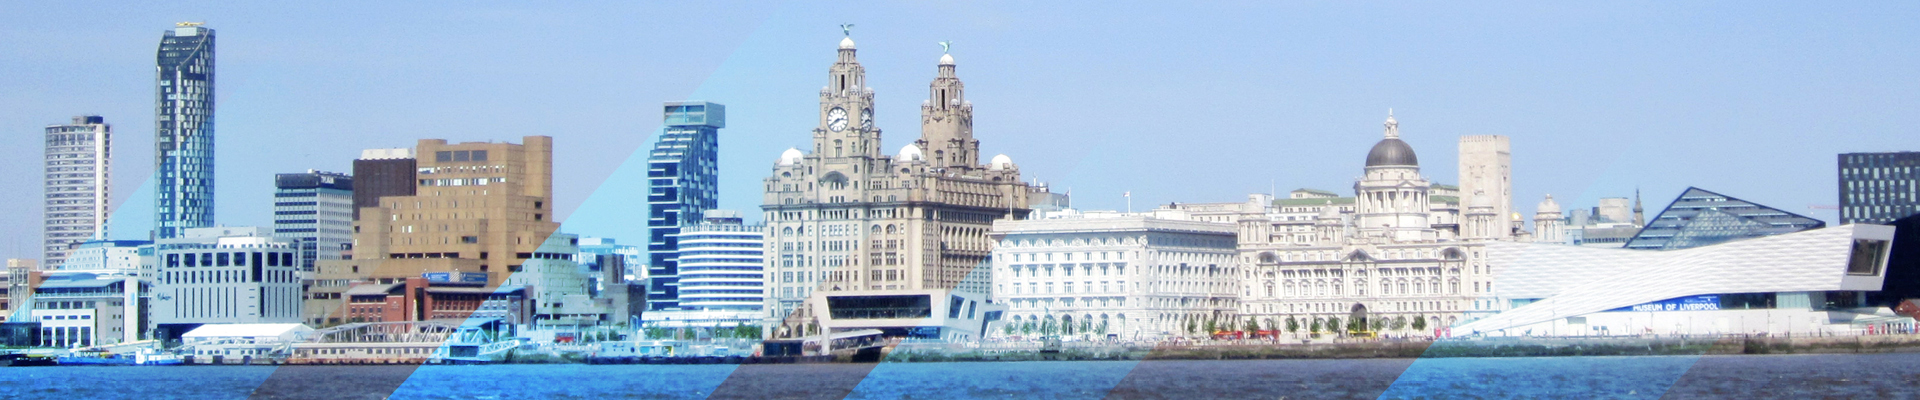 Liverpool city docs, with several buildings along the riverside